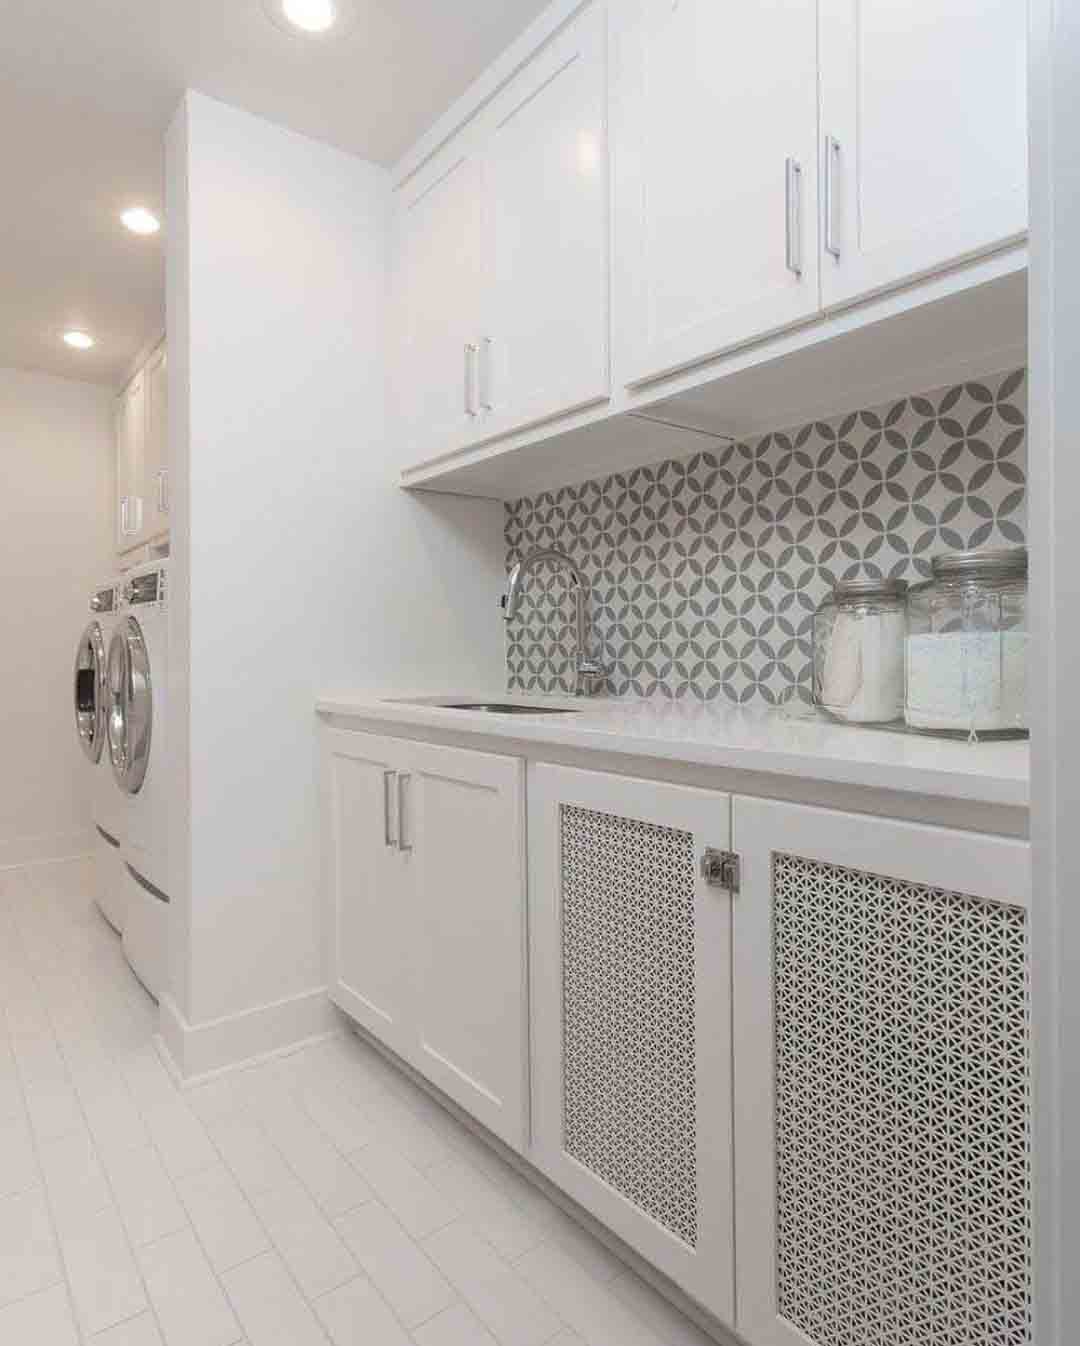 Designer Perforated Metal infill panels used as laundry room cabinet inserts.